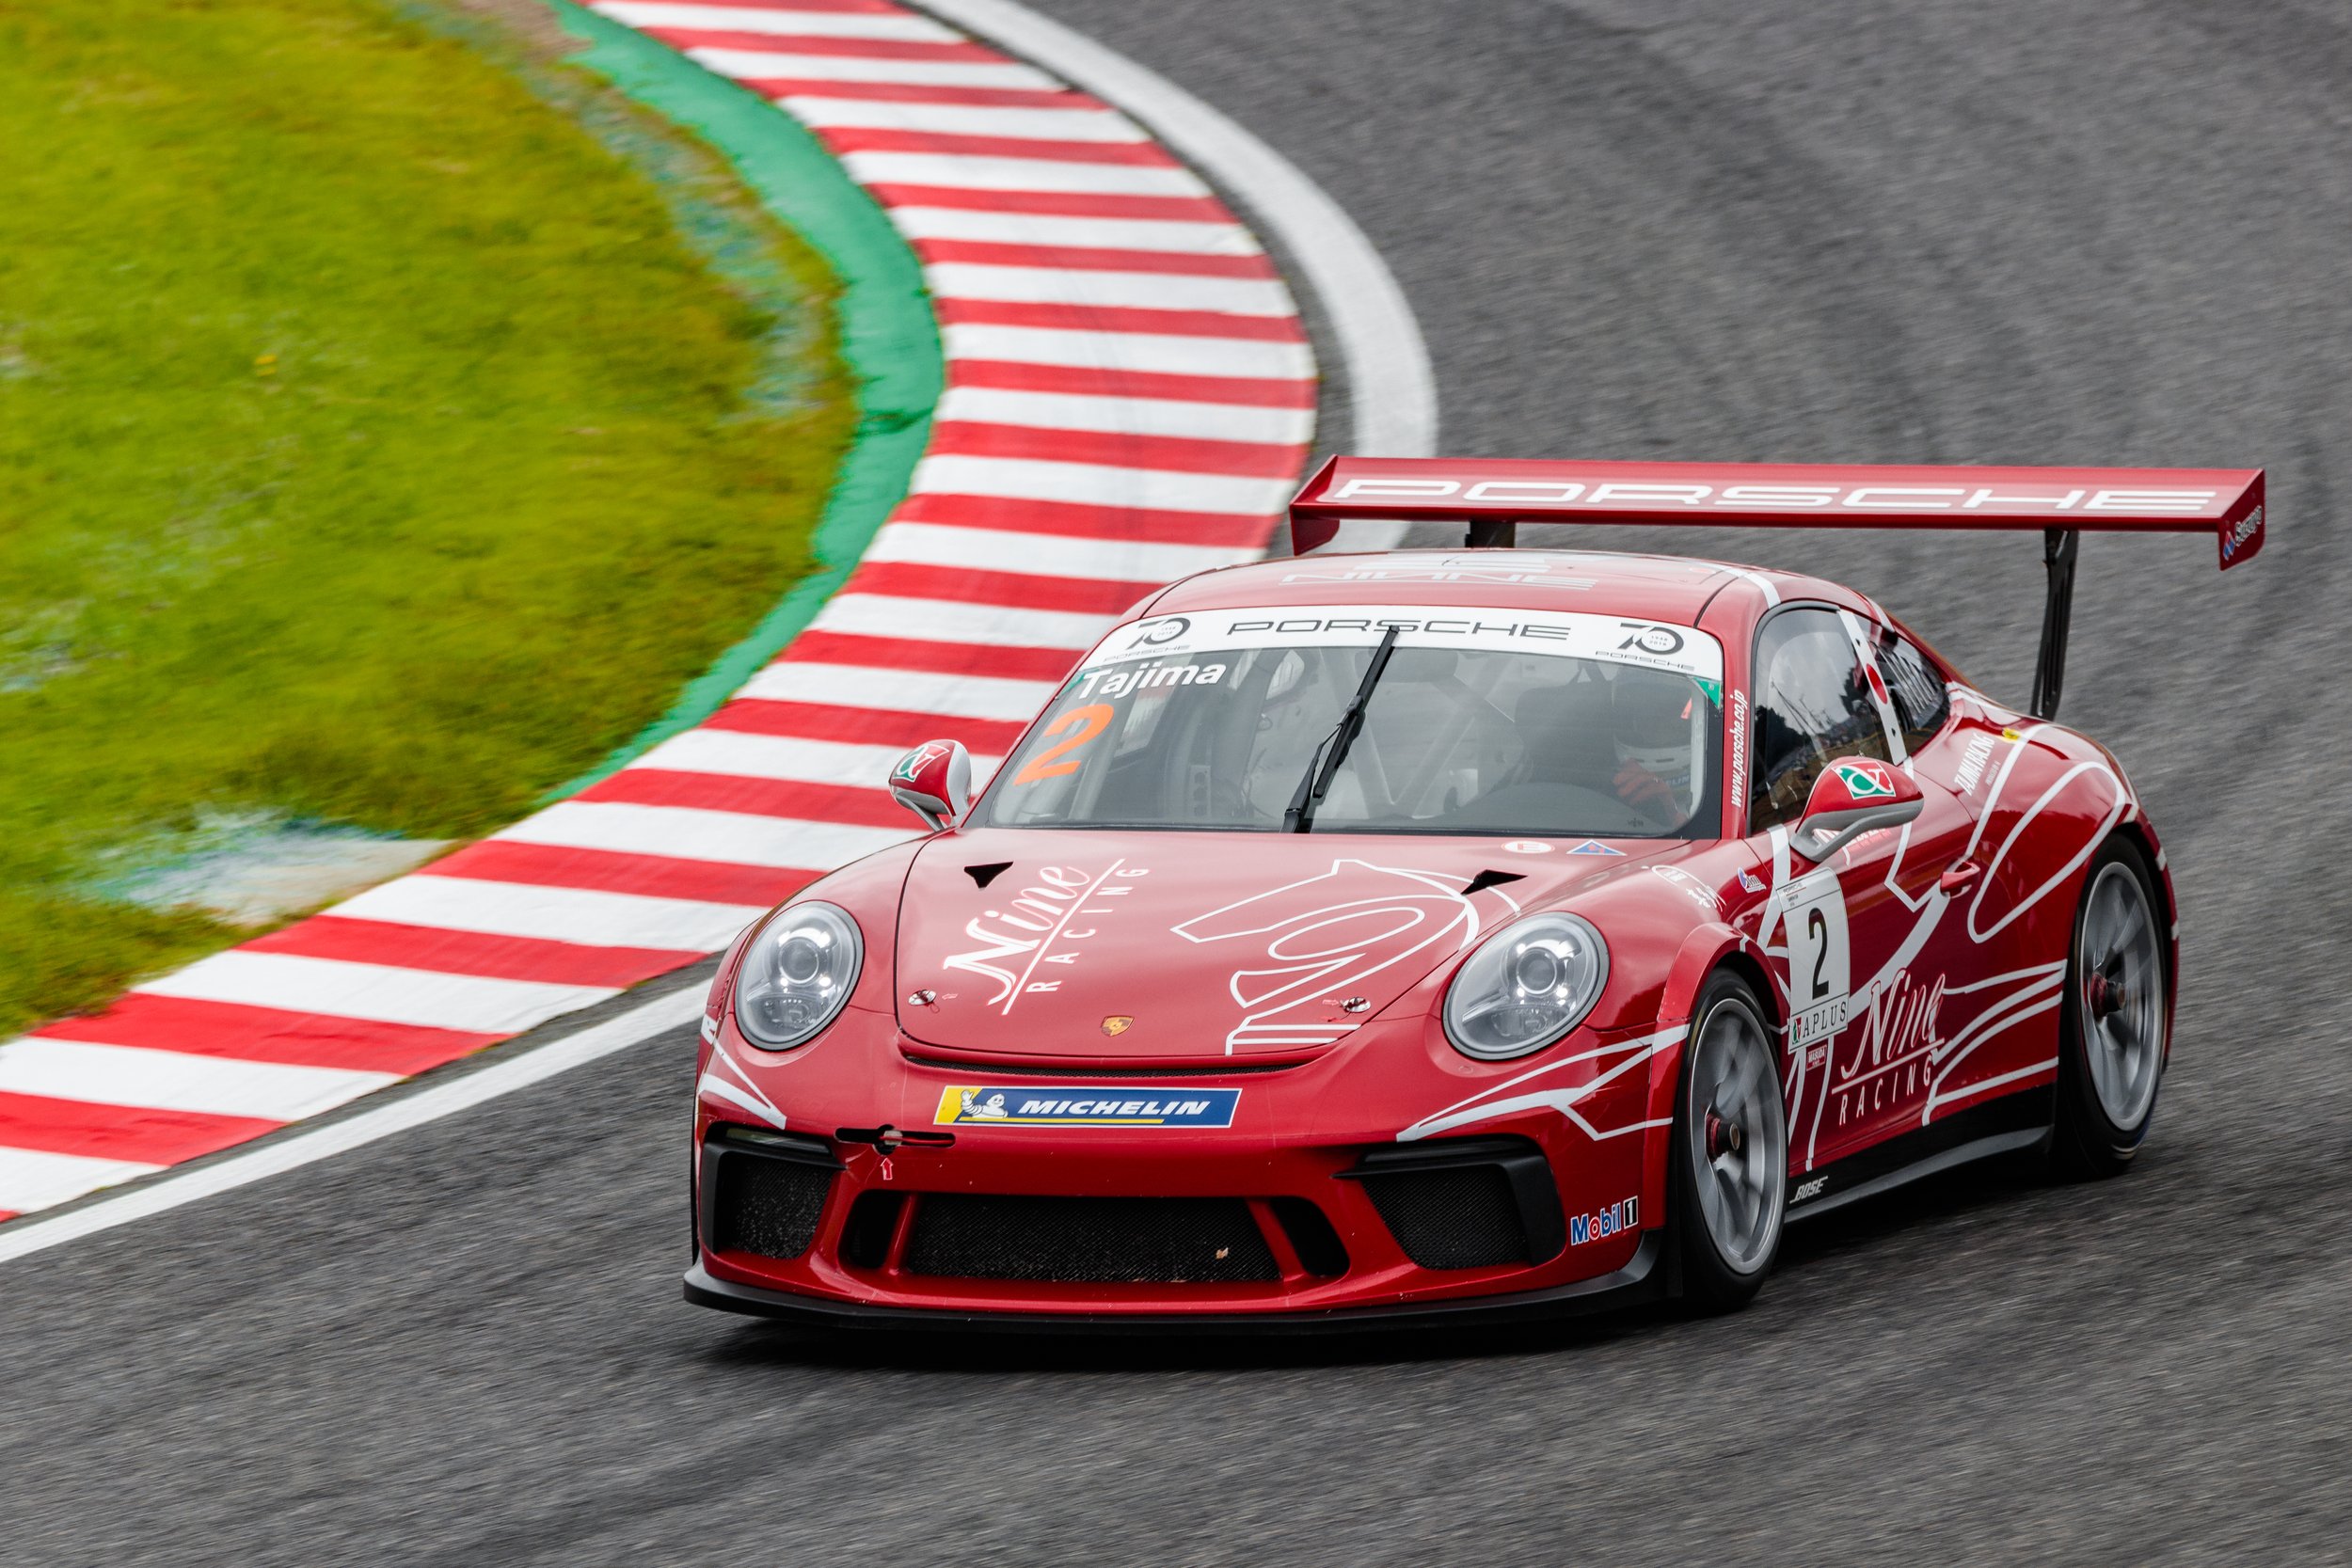 Porsche cup car during the Japanese GP weekend in 2018